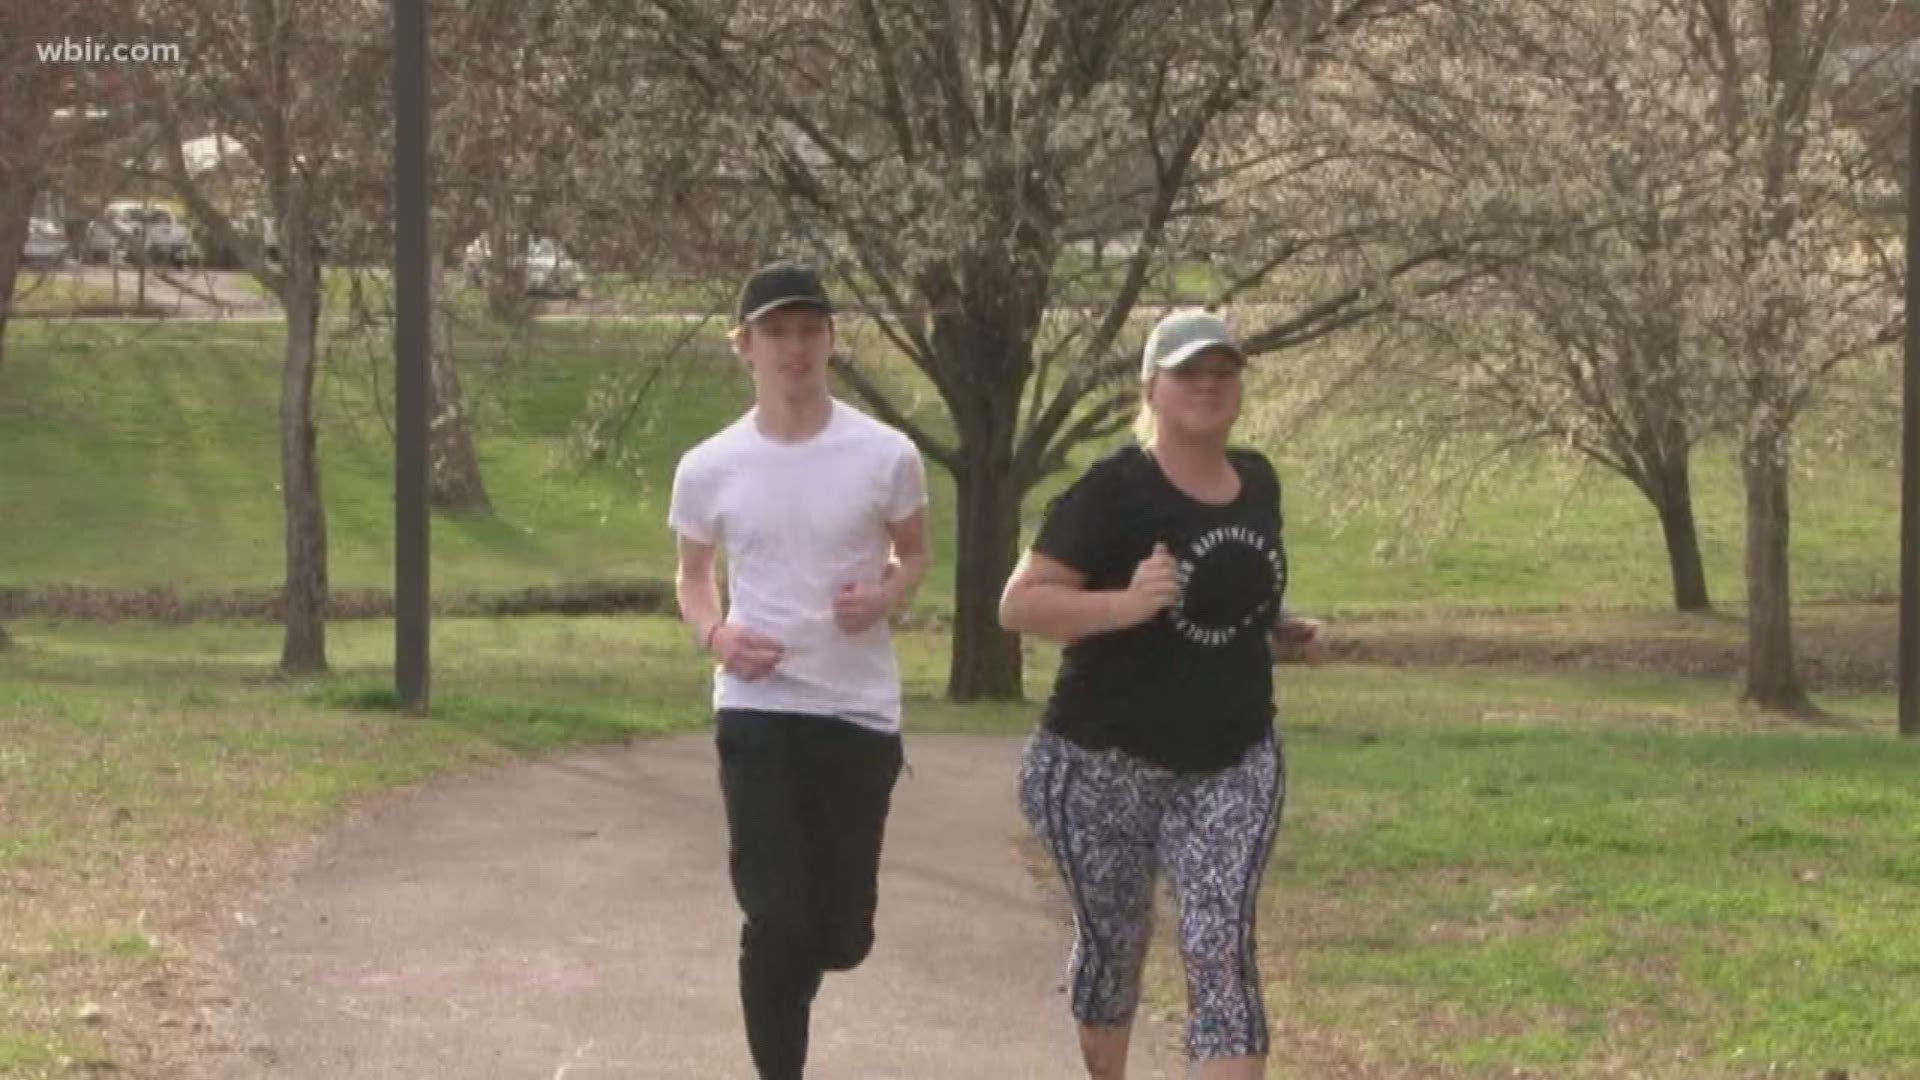 One Alcoa woman is using a different approach to prepare for the race: she's changing her diet.